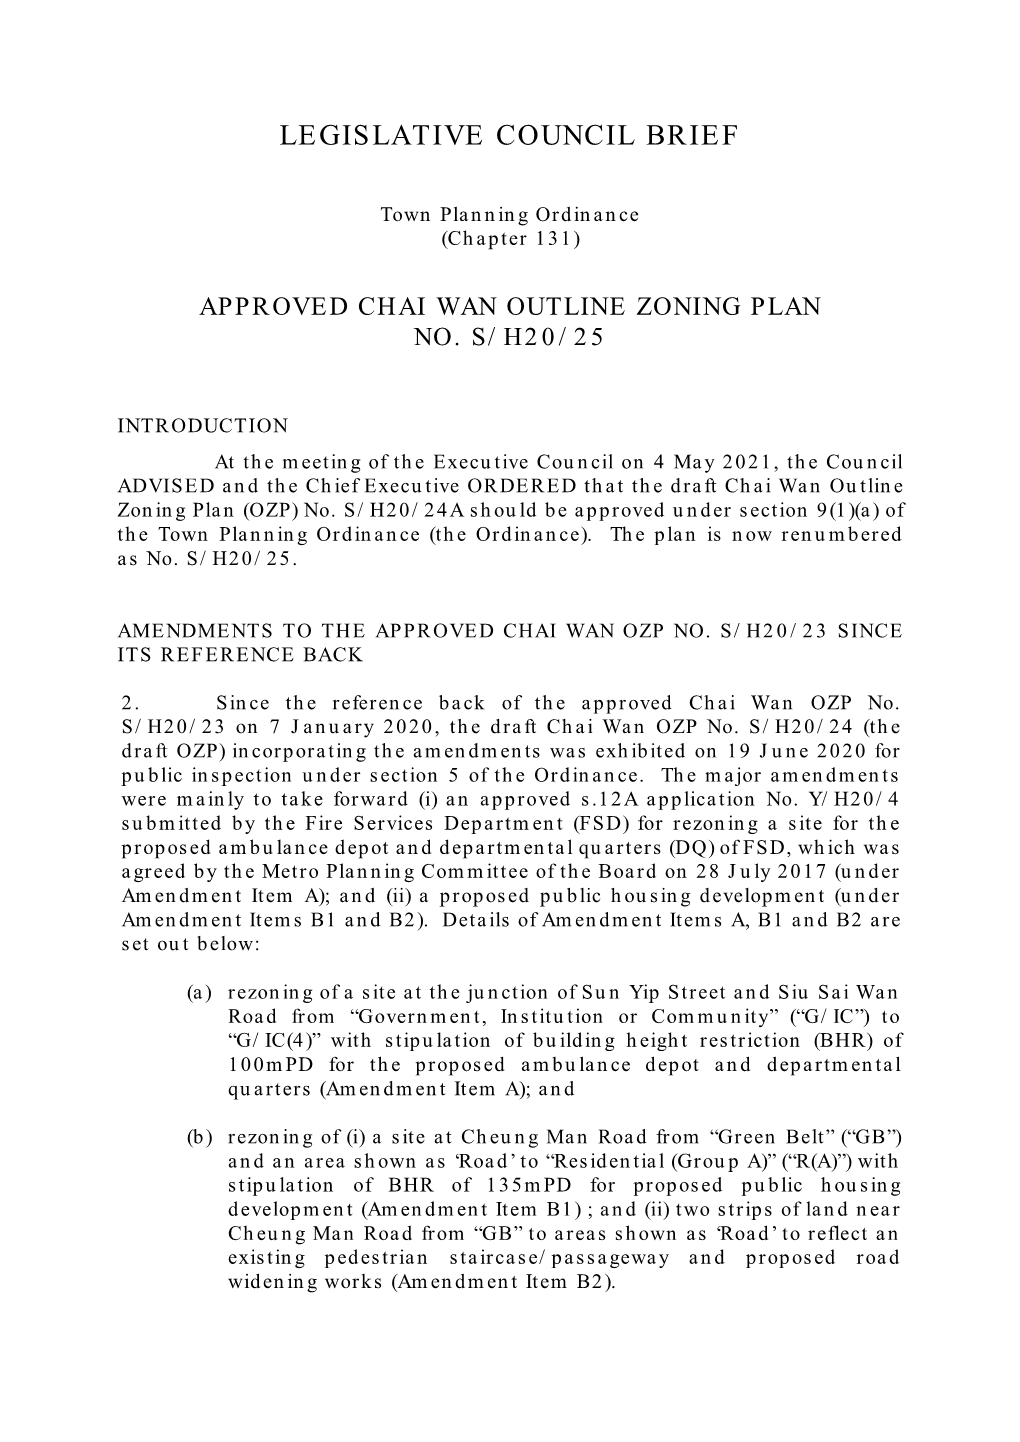 Approved Chai Wan Outline Zoning Plan No